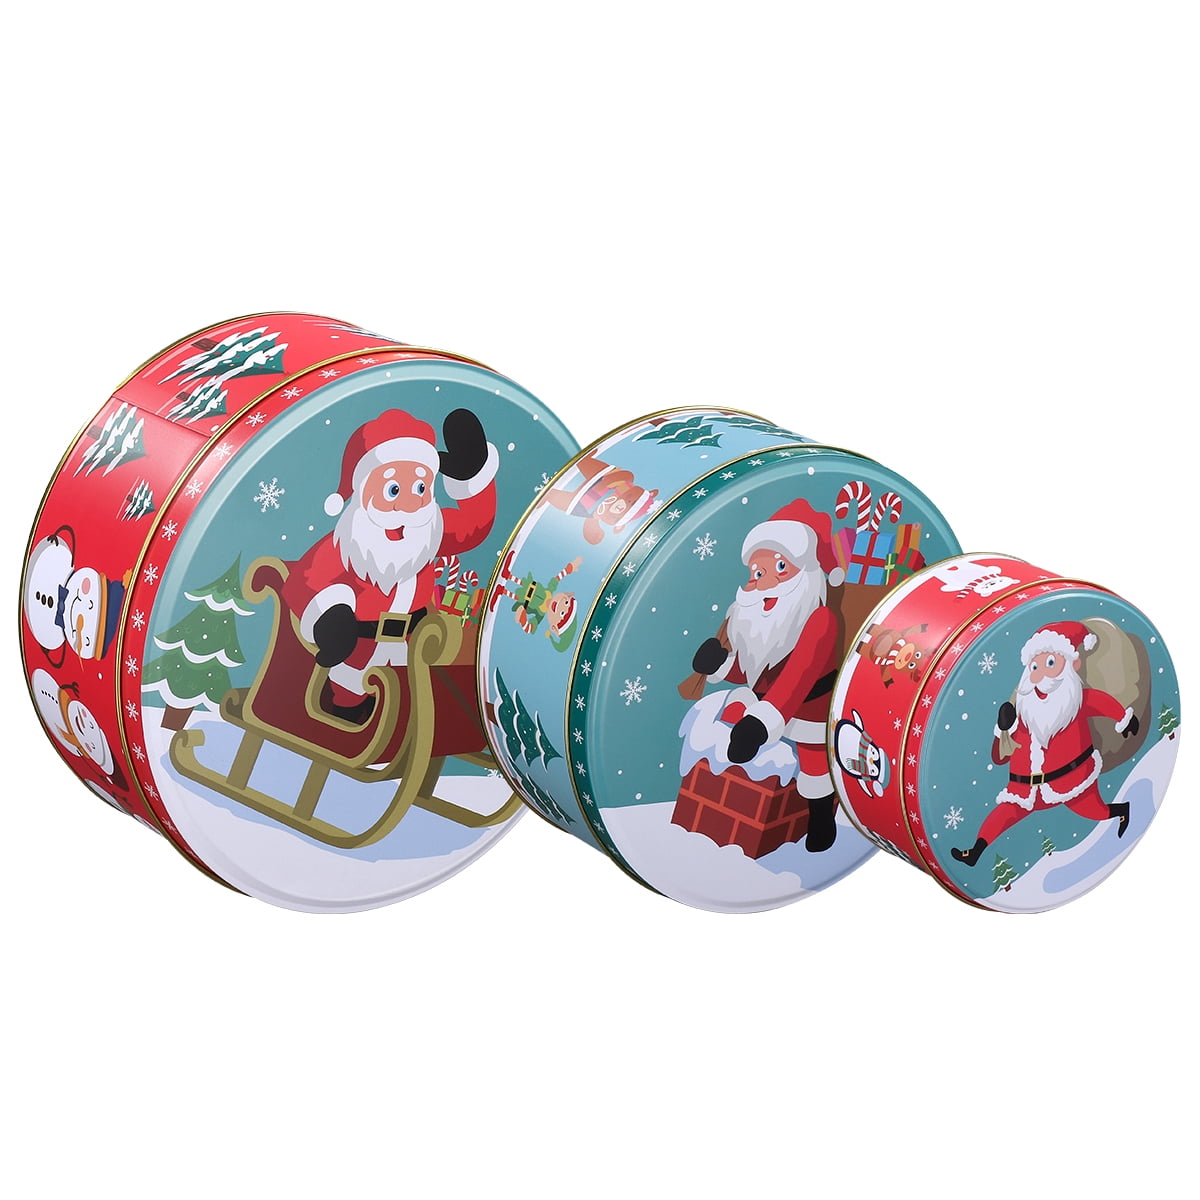 Hemoton Hemoton 3pcs Christmas Tinplate Cookie Tins Candies Biscuits Treat Boxes Small Gift Case 